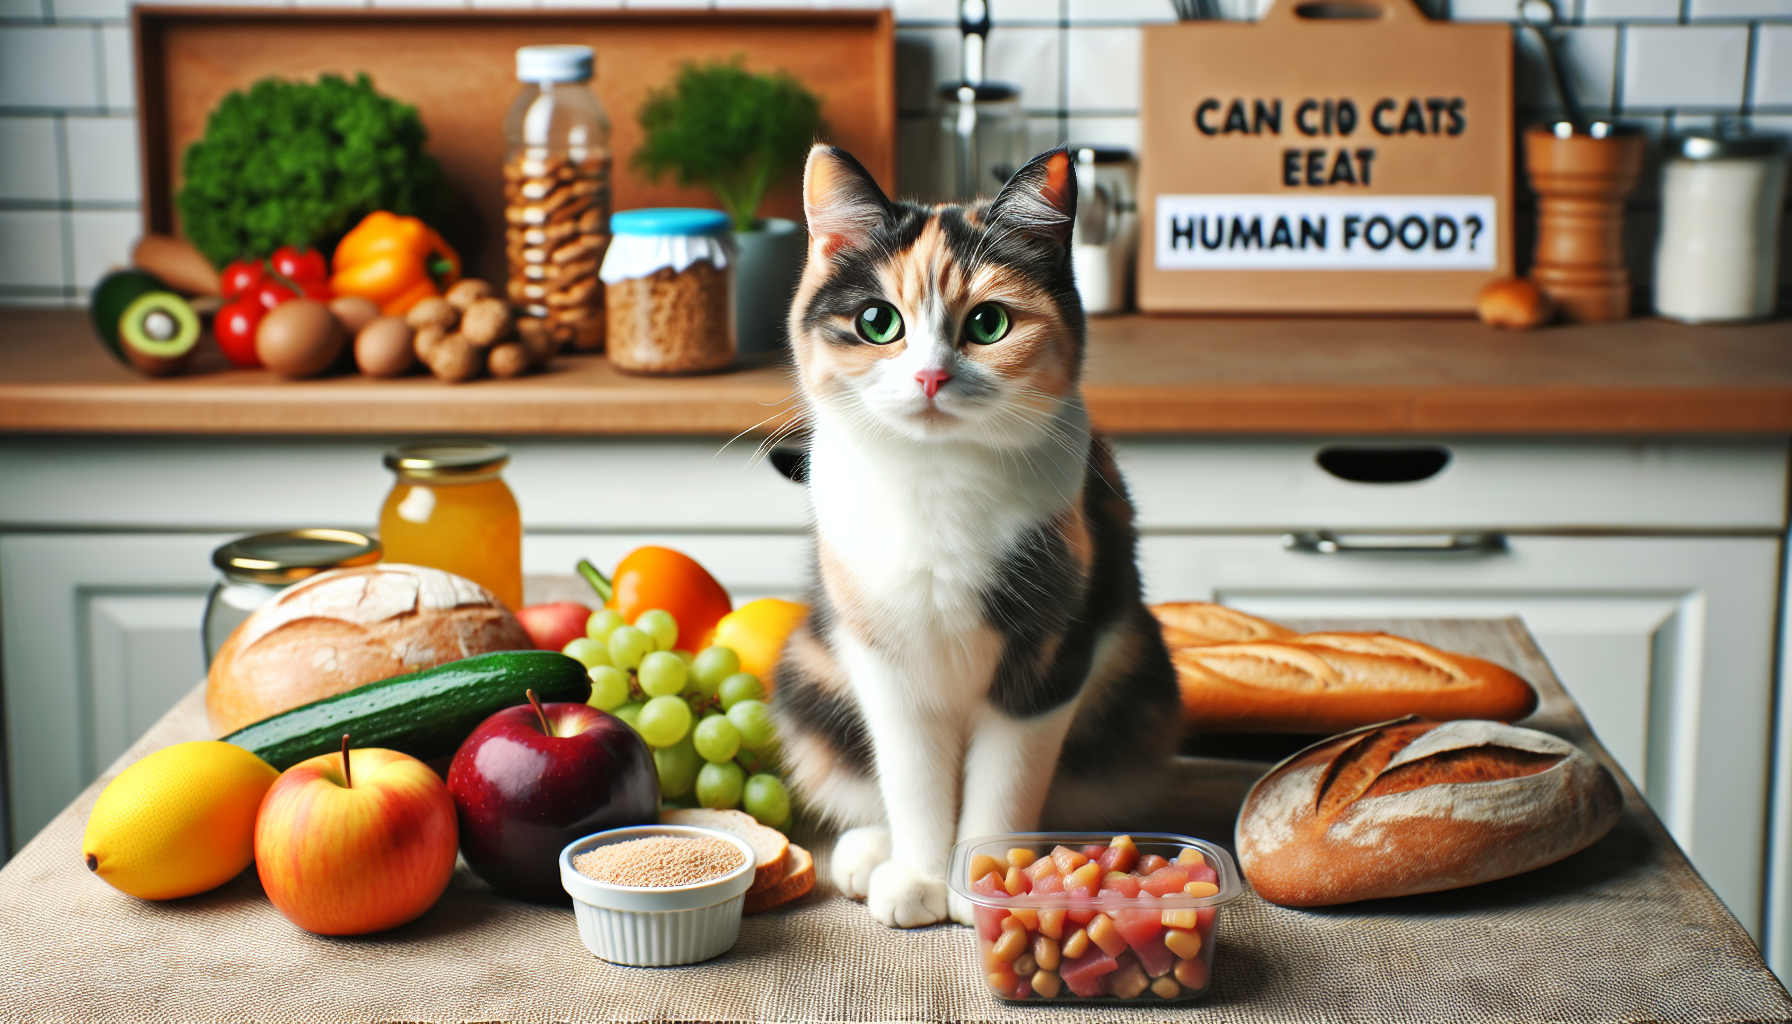 Can Cats Eat Human Food